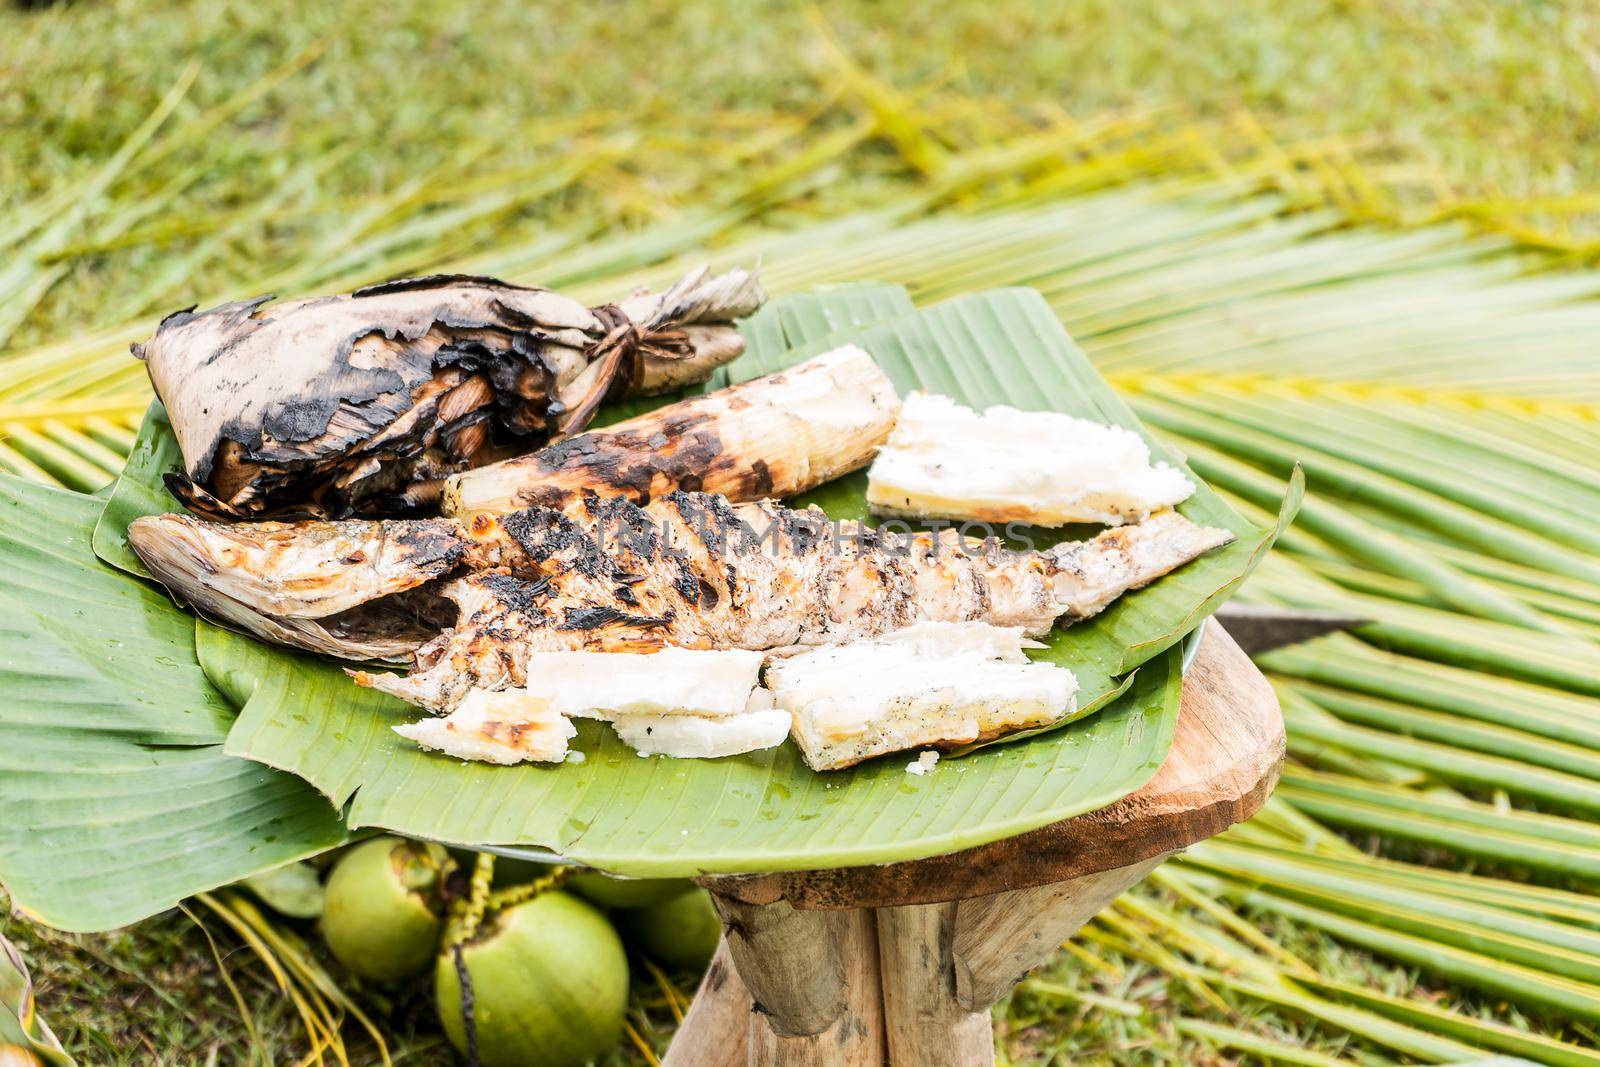 Smoked and grilled fish and cassava, traditional food of the indigenous peoples of Nicaragua Central America